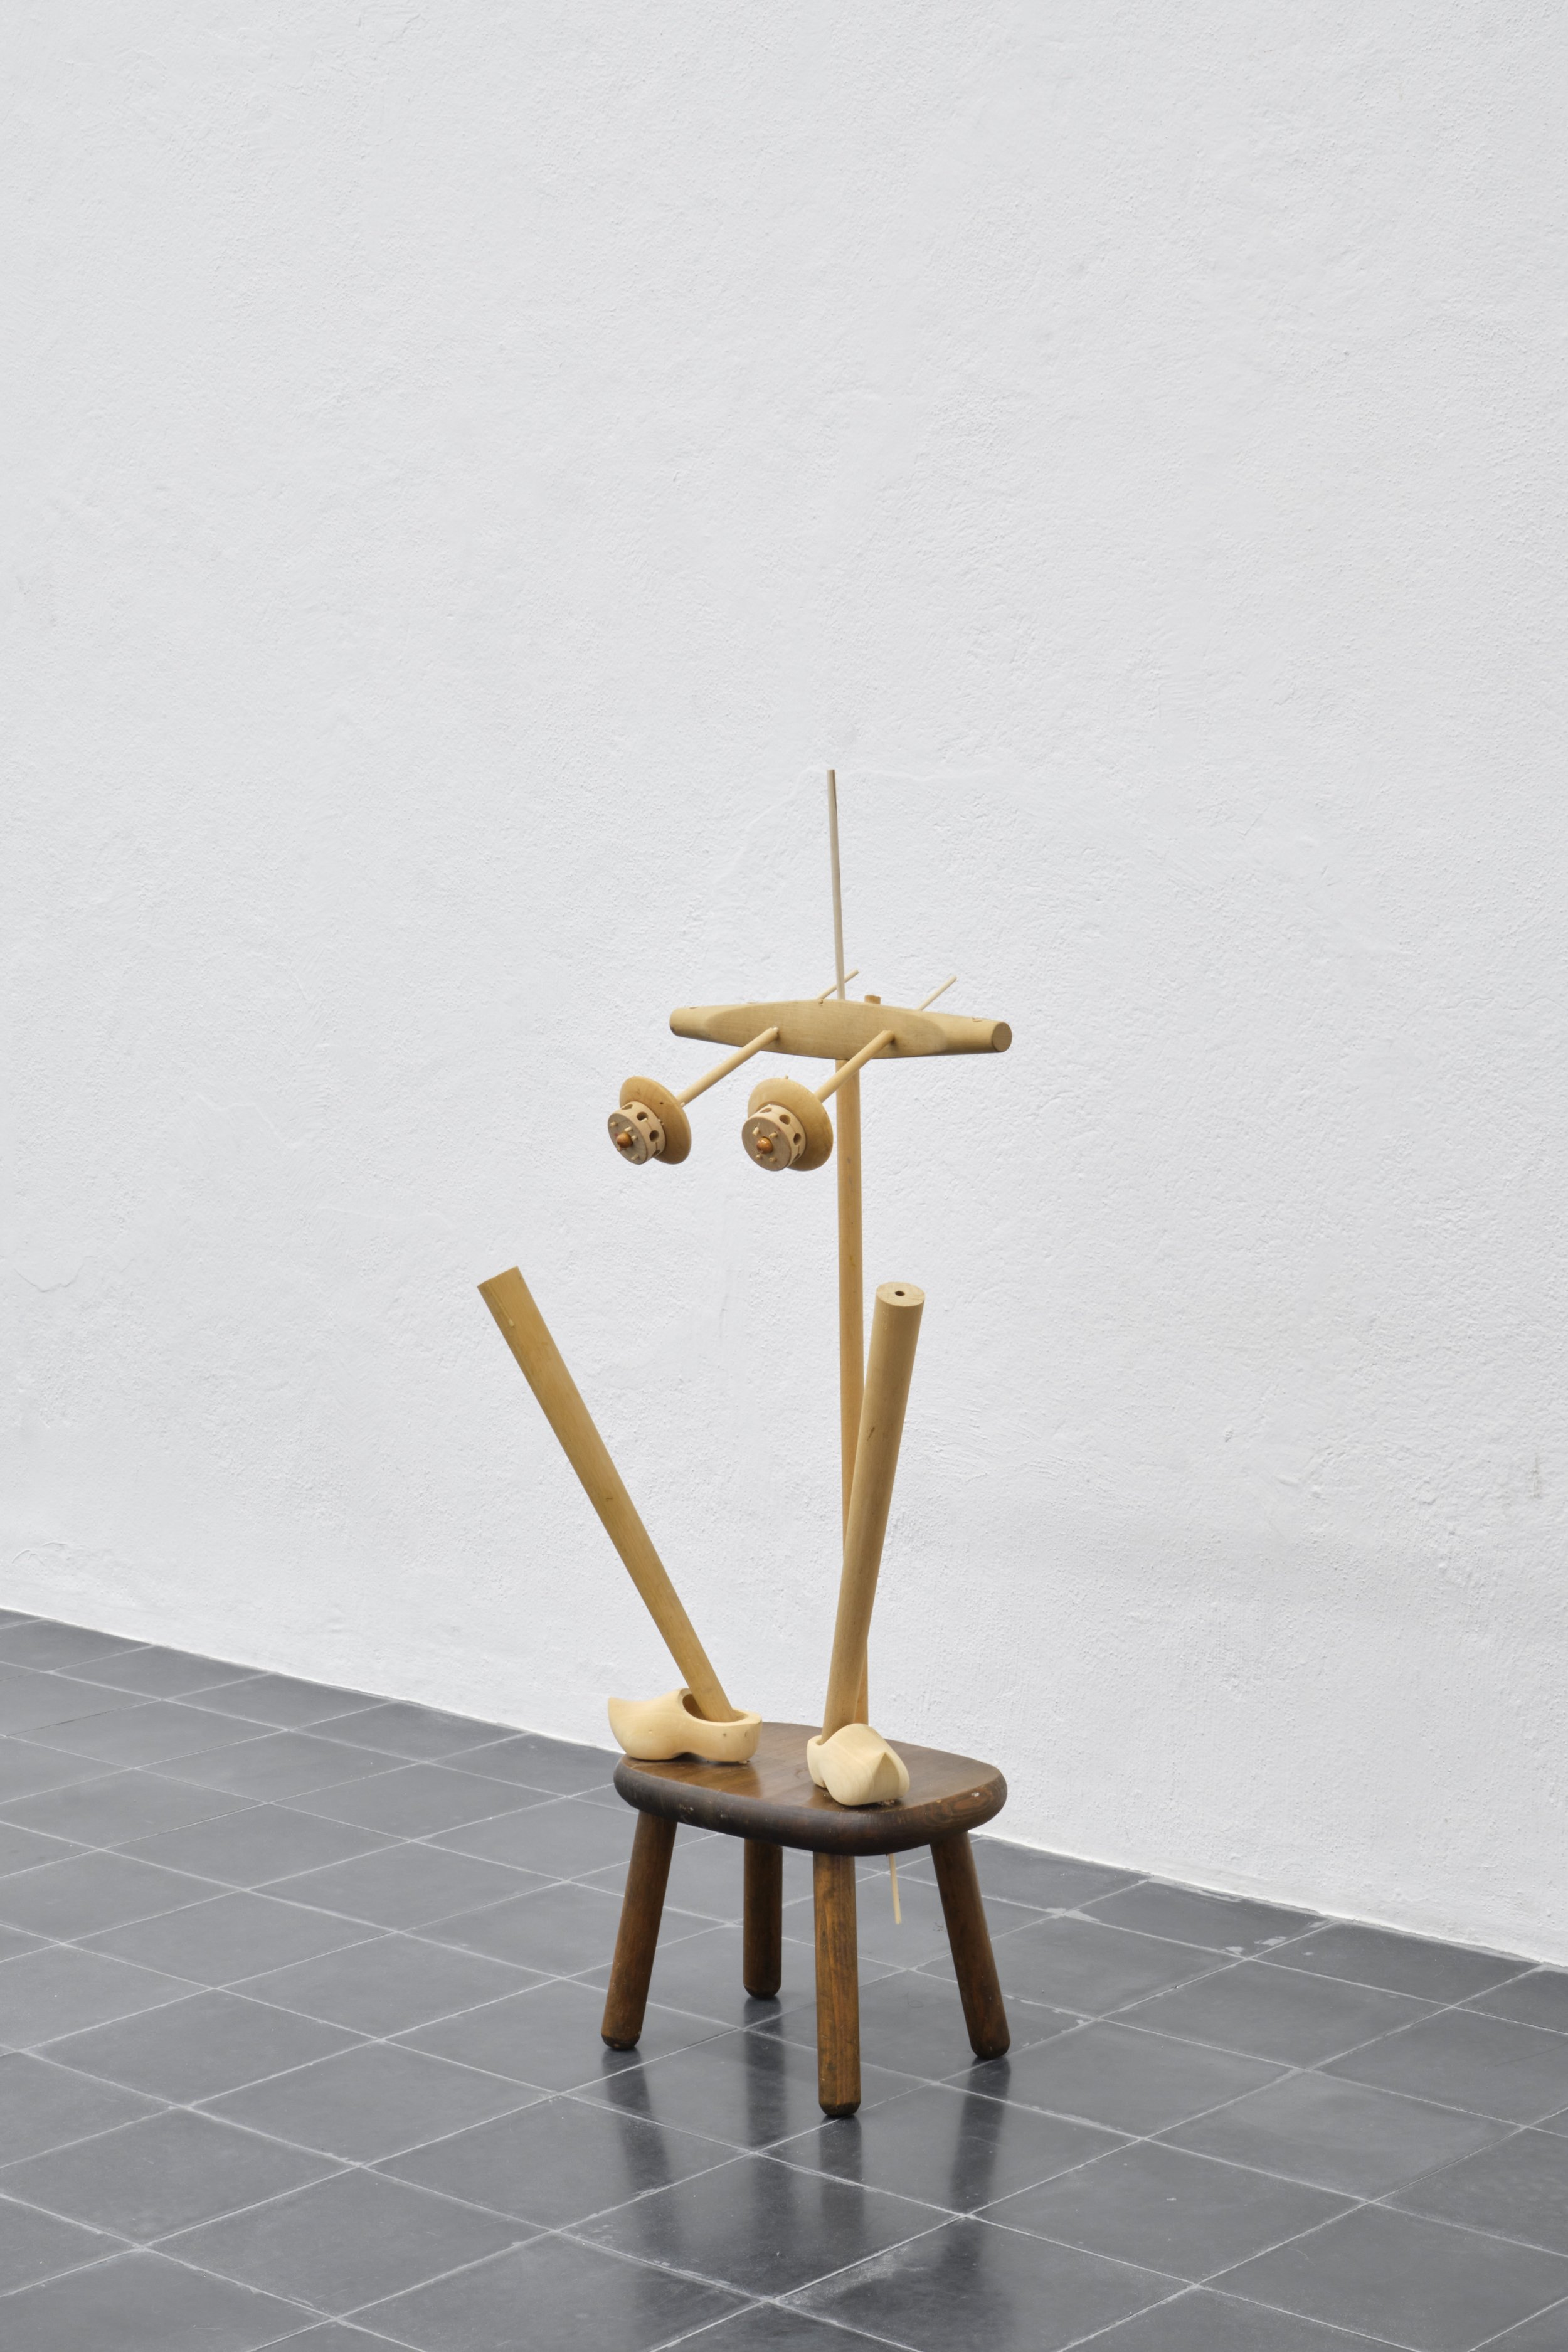   Yogini no. 20 , 2022. Wood, paint and fake fur. 41 x 15 x 12 inches 